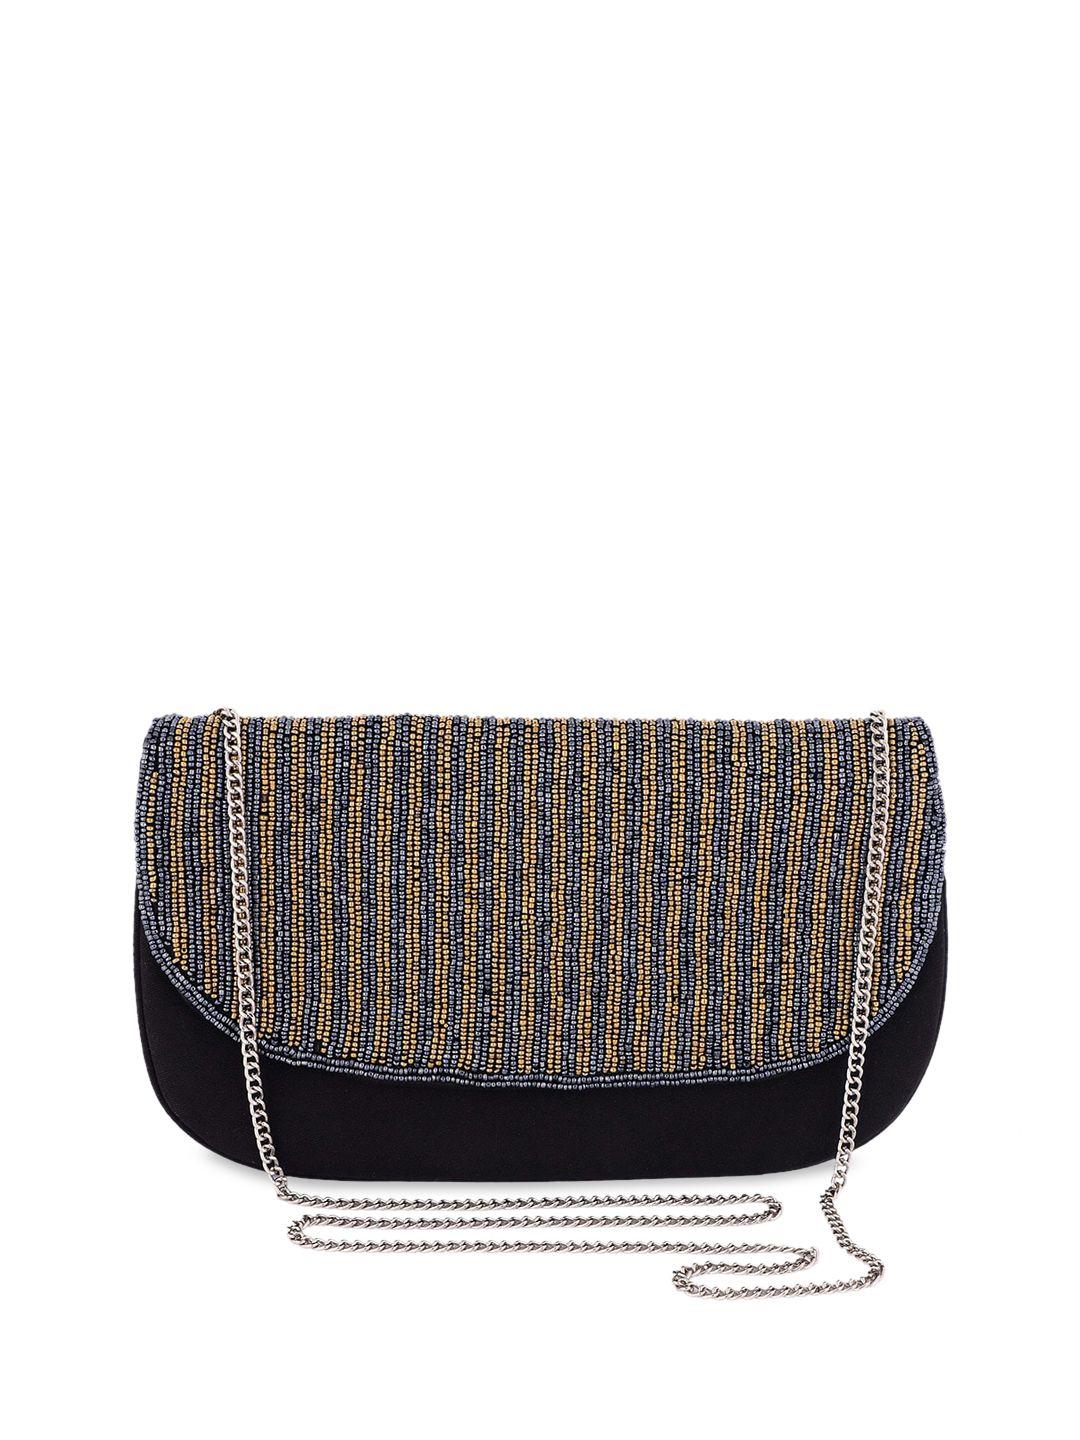 rezzy navy blue & silver-toned embellished clutch